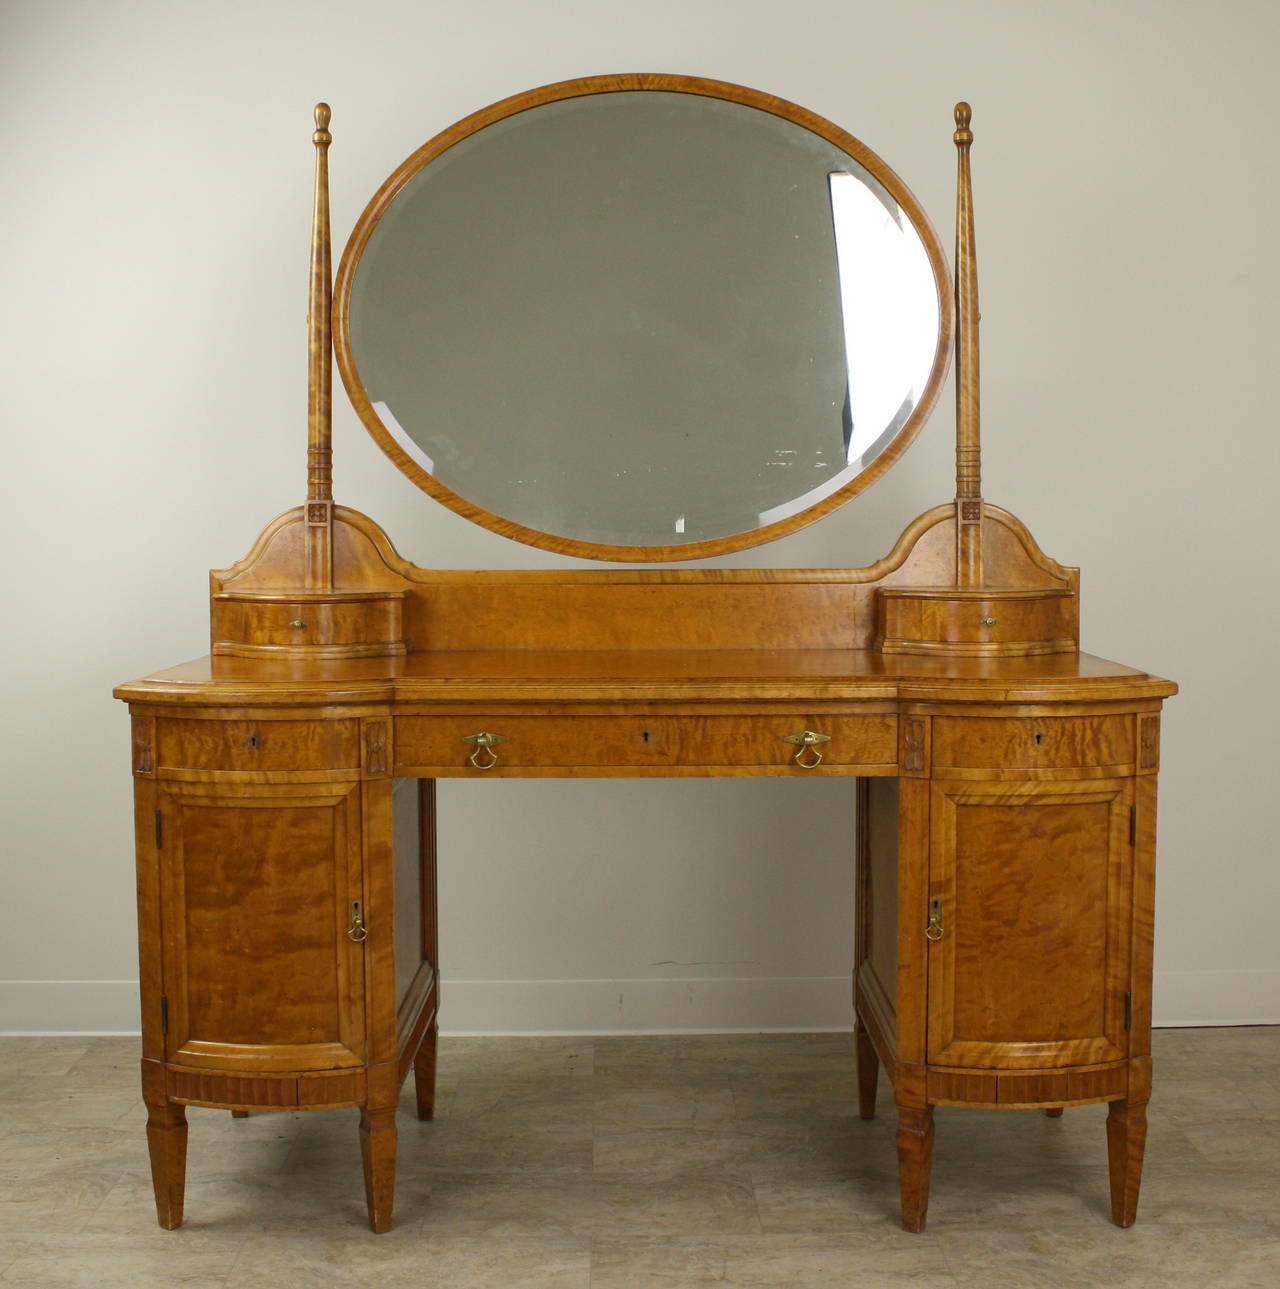 This dramatic vanity is classic 30's, it is easy to see the deco influence.  Very finely made, on the Continent, it is dramatic and imposing.  Carved moldings, wonderful little serpentine shaped drawers, a grand mirror, all seem meant for a movie